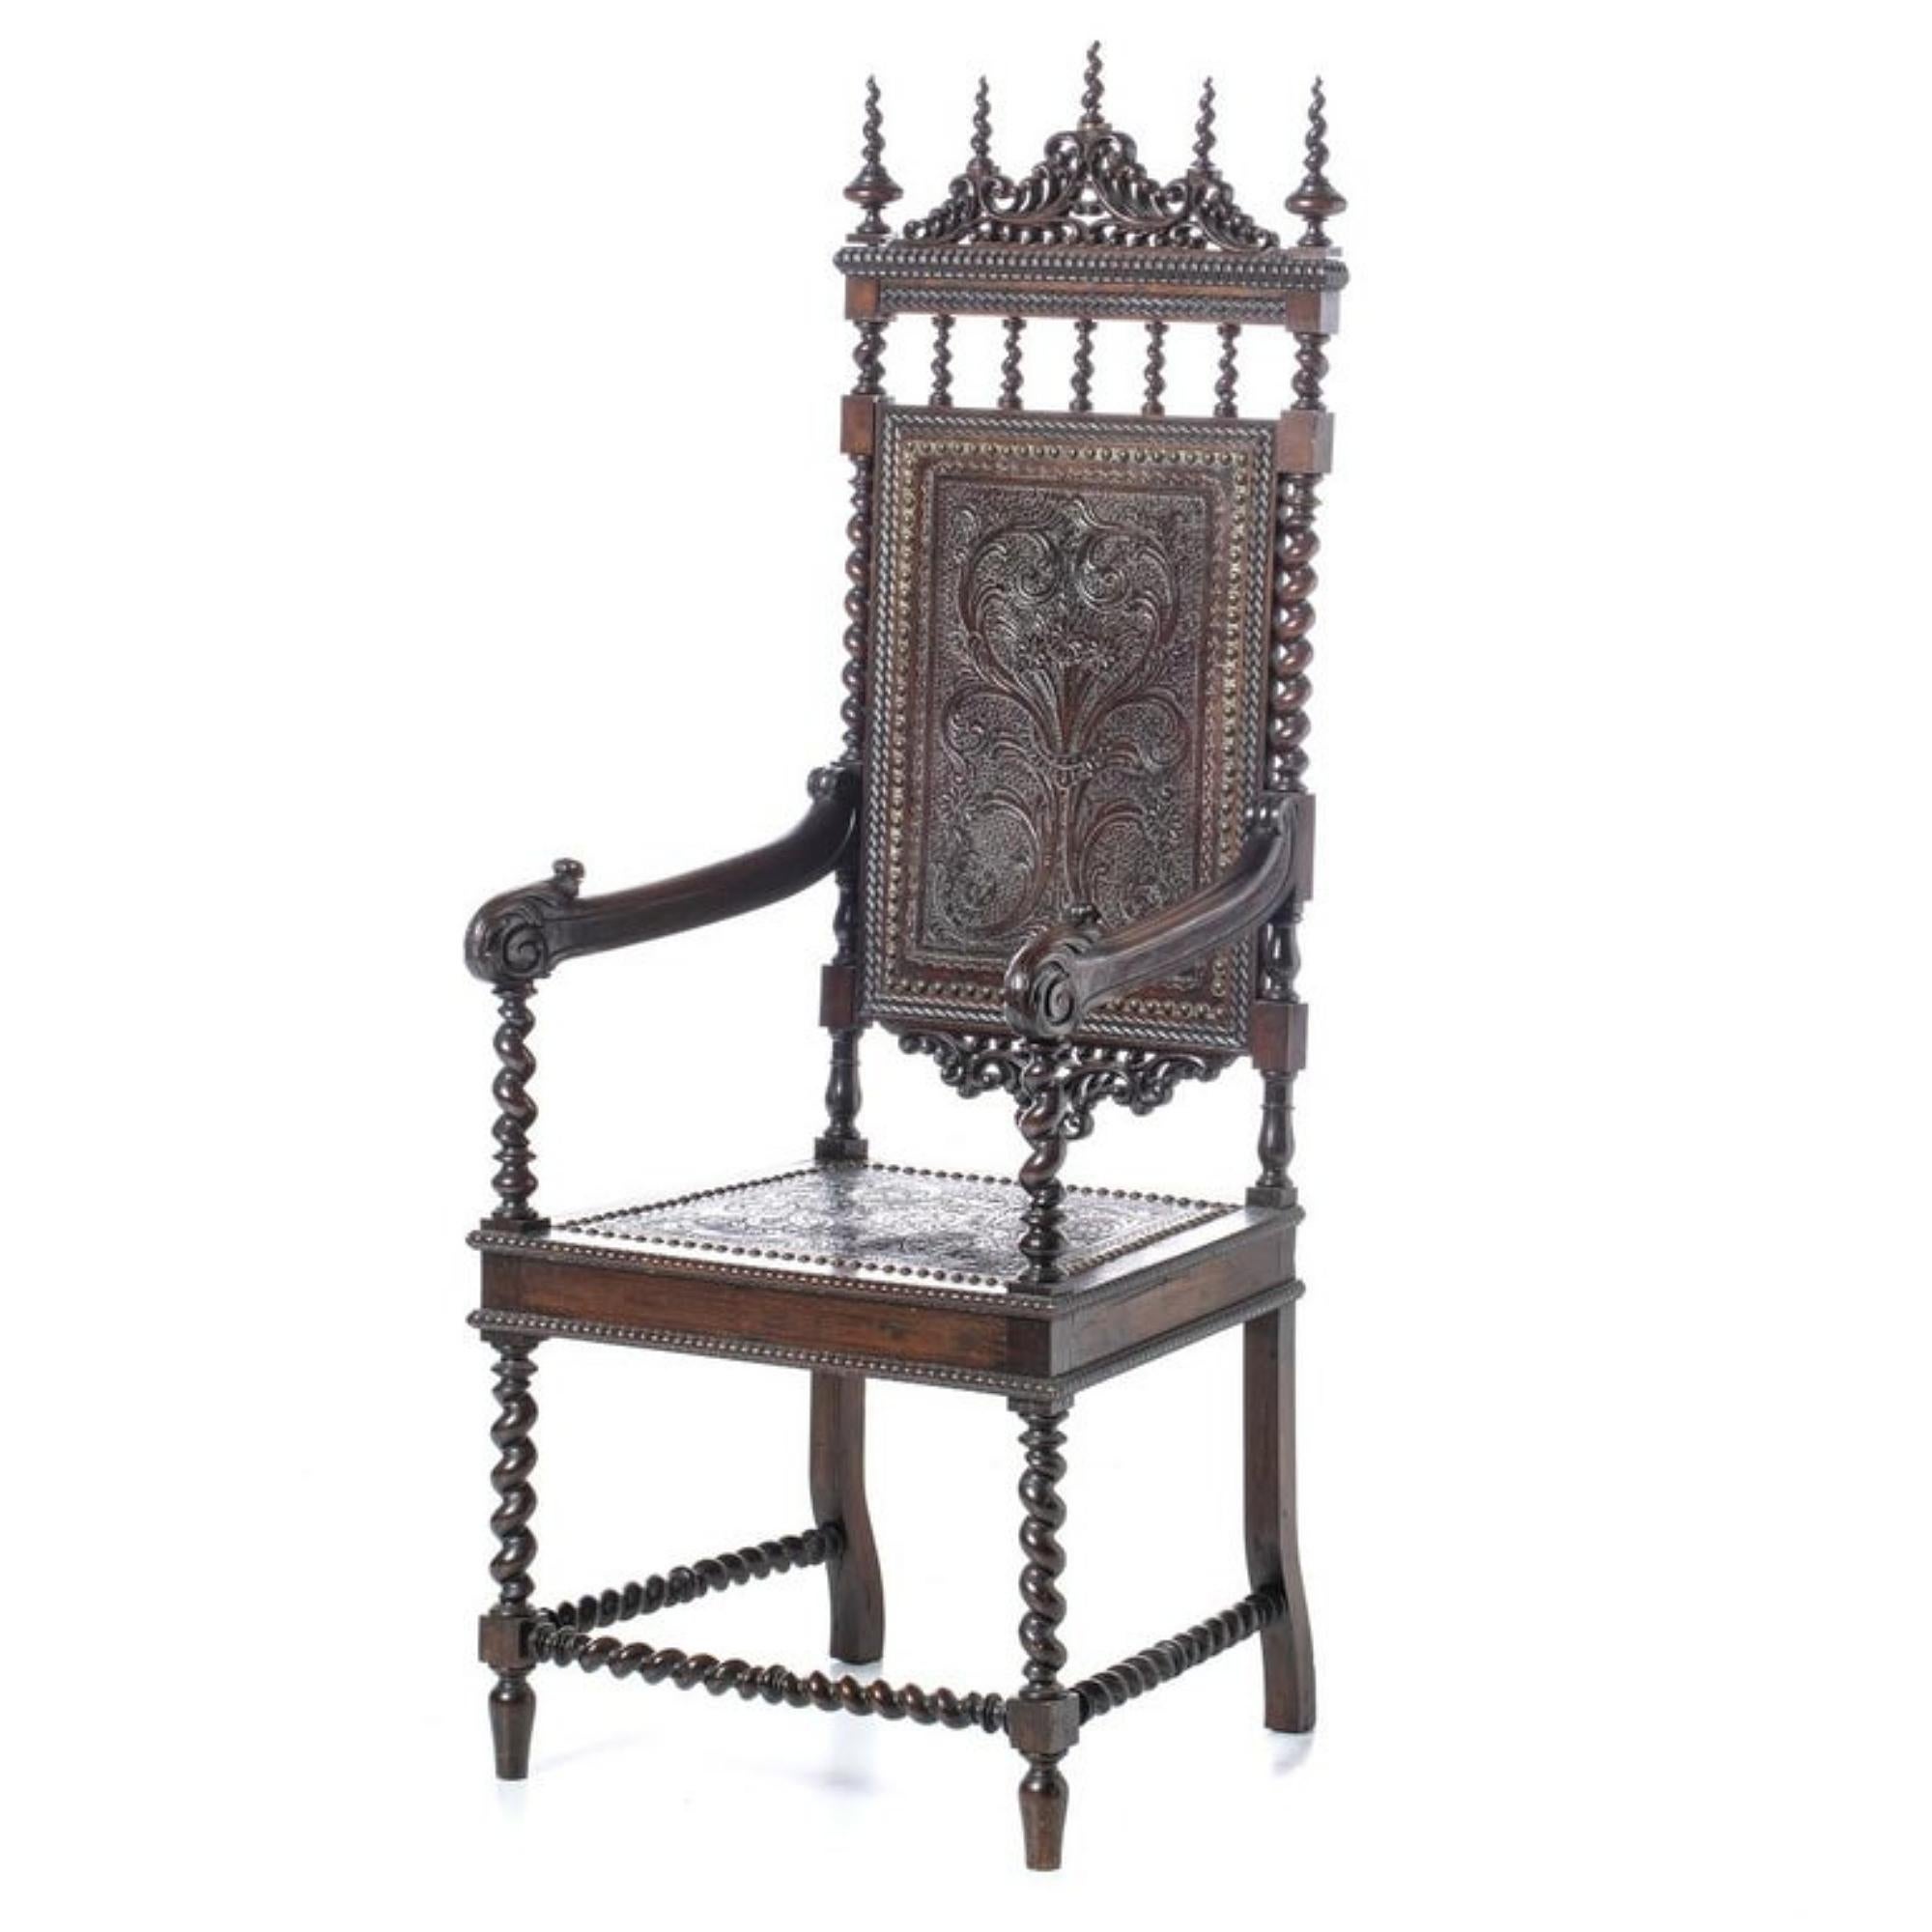 Rare Portuguese armchair
19th century
in kingwood, back and seats with leather and studs, decorated with plant motifs. 
Signs of use. 
Dim.: 140 x 55.5 x 48 cm.